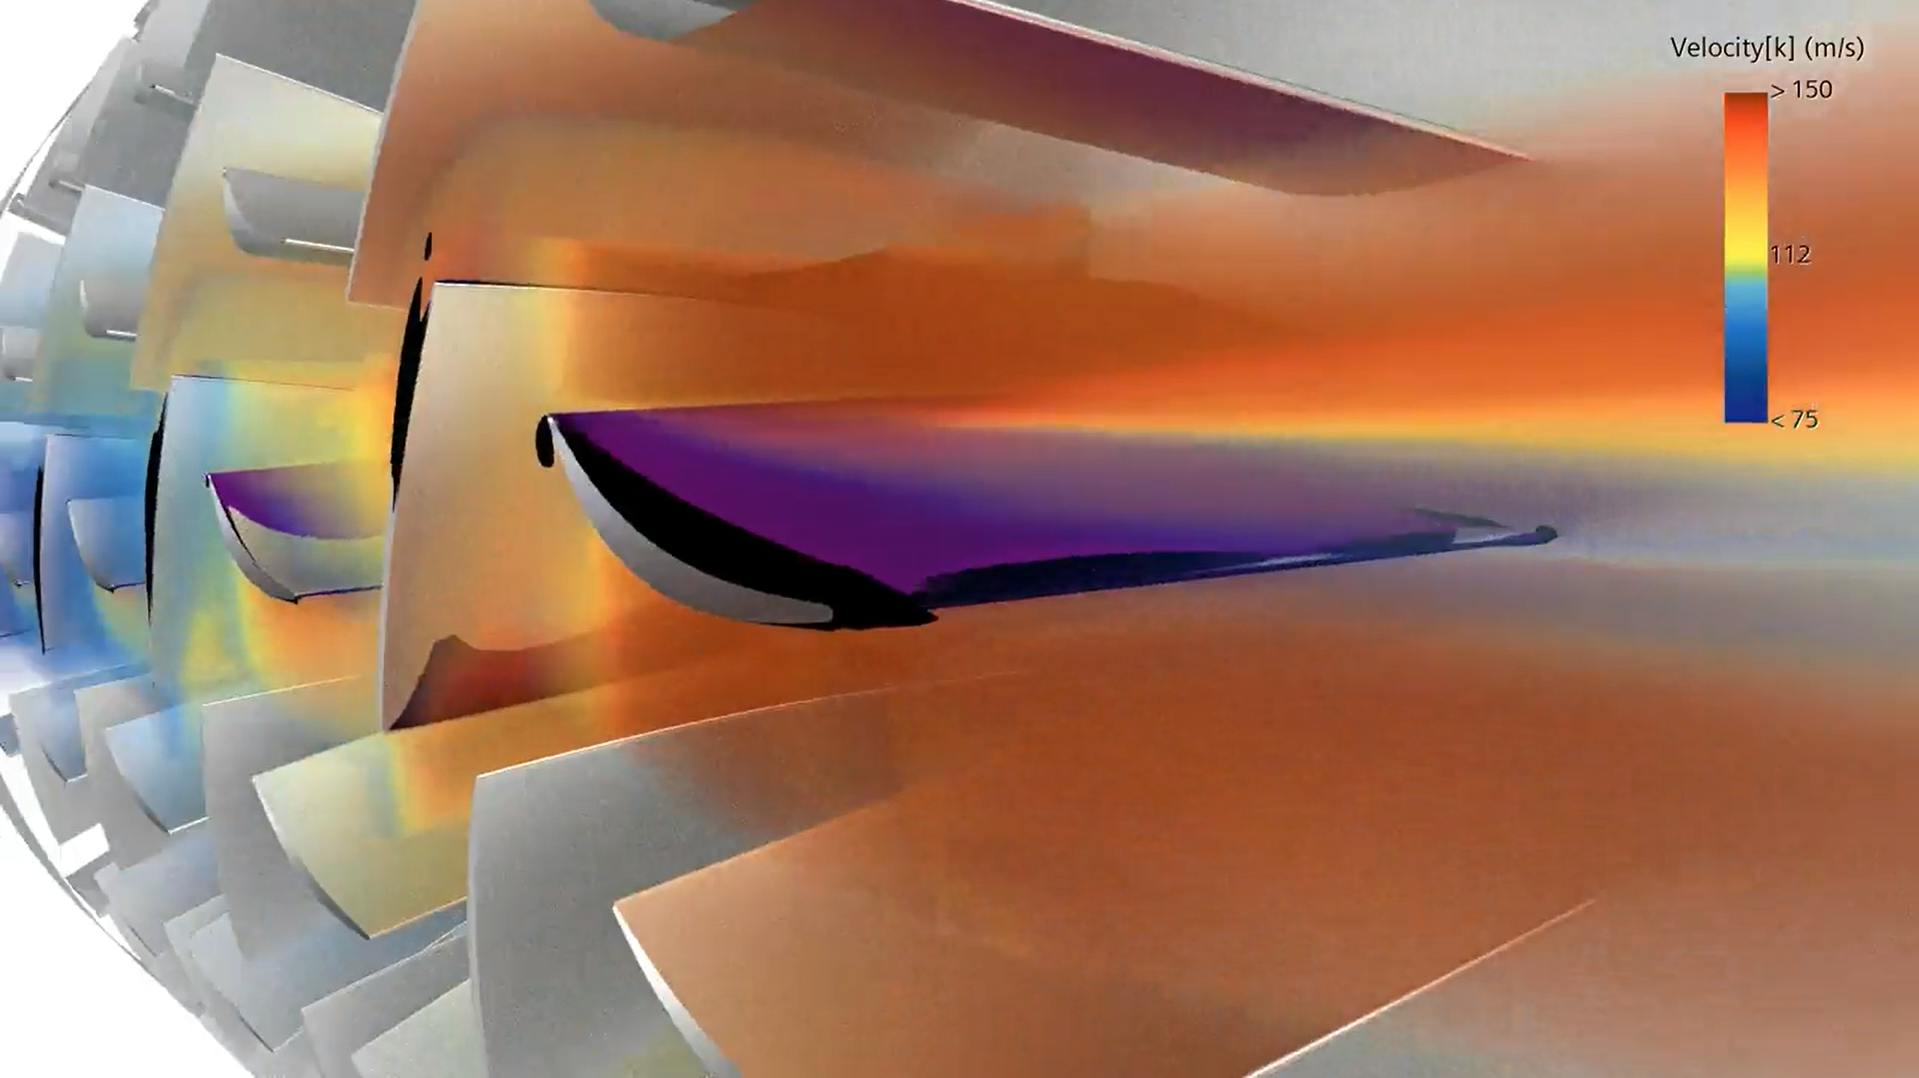 Demonstration of how CFD software can be used to create and refine turbomachinery simulations